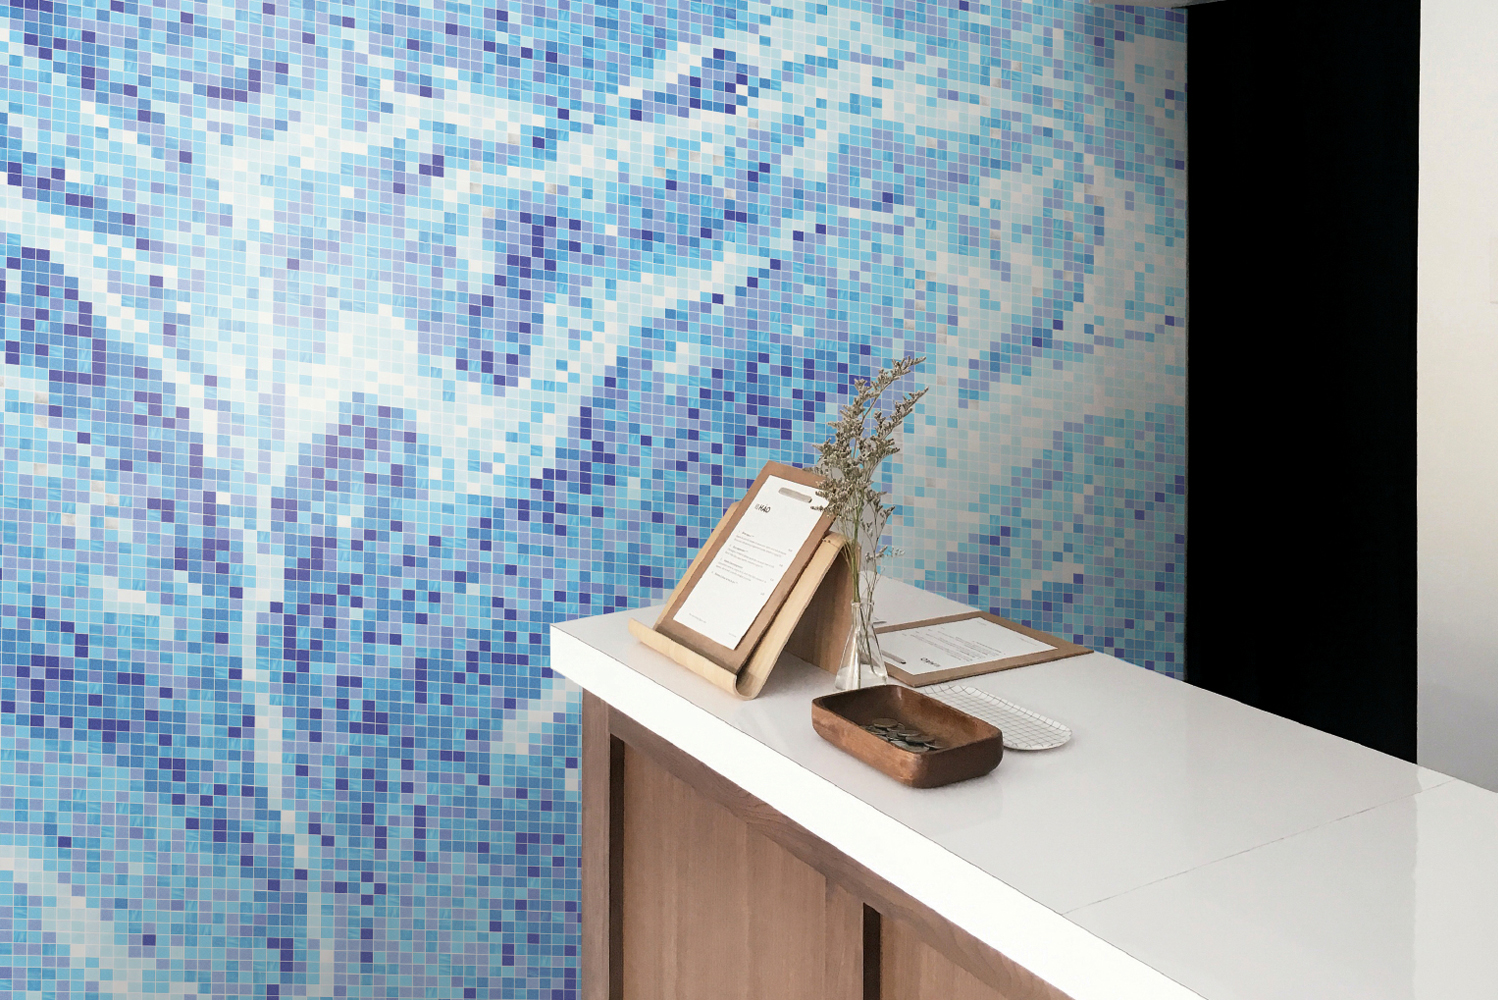 Artaic launched the latest addition to its SPLASH Collection of fluid-inspired mosaics Emulsion 